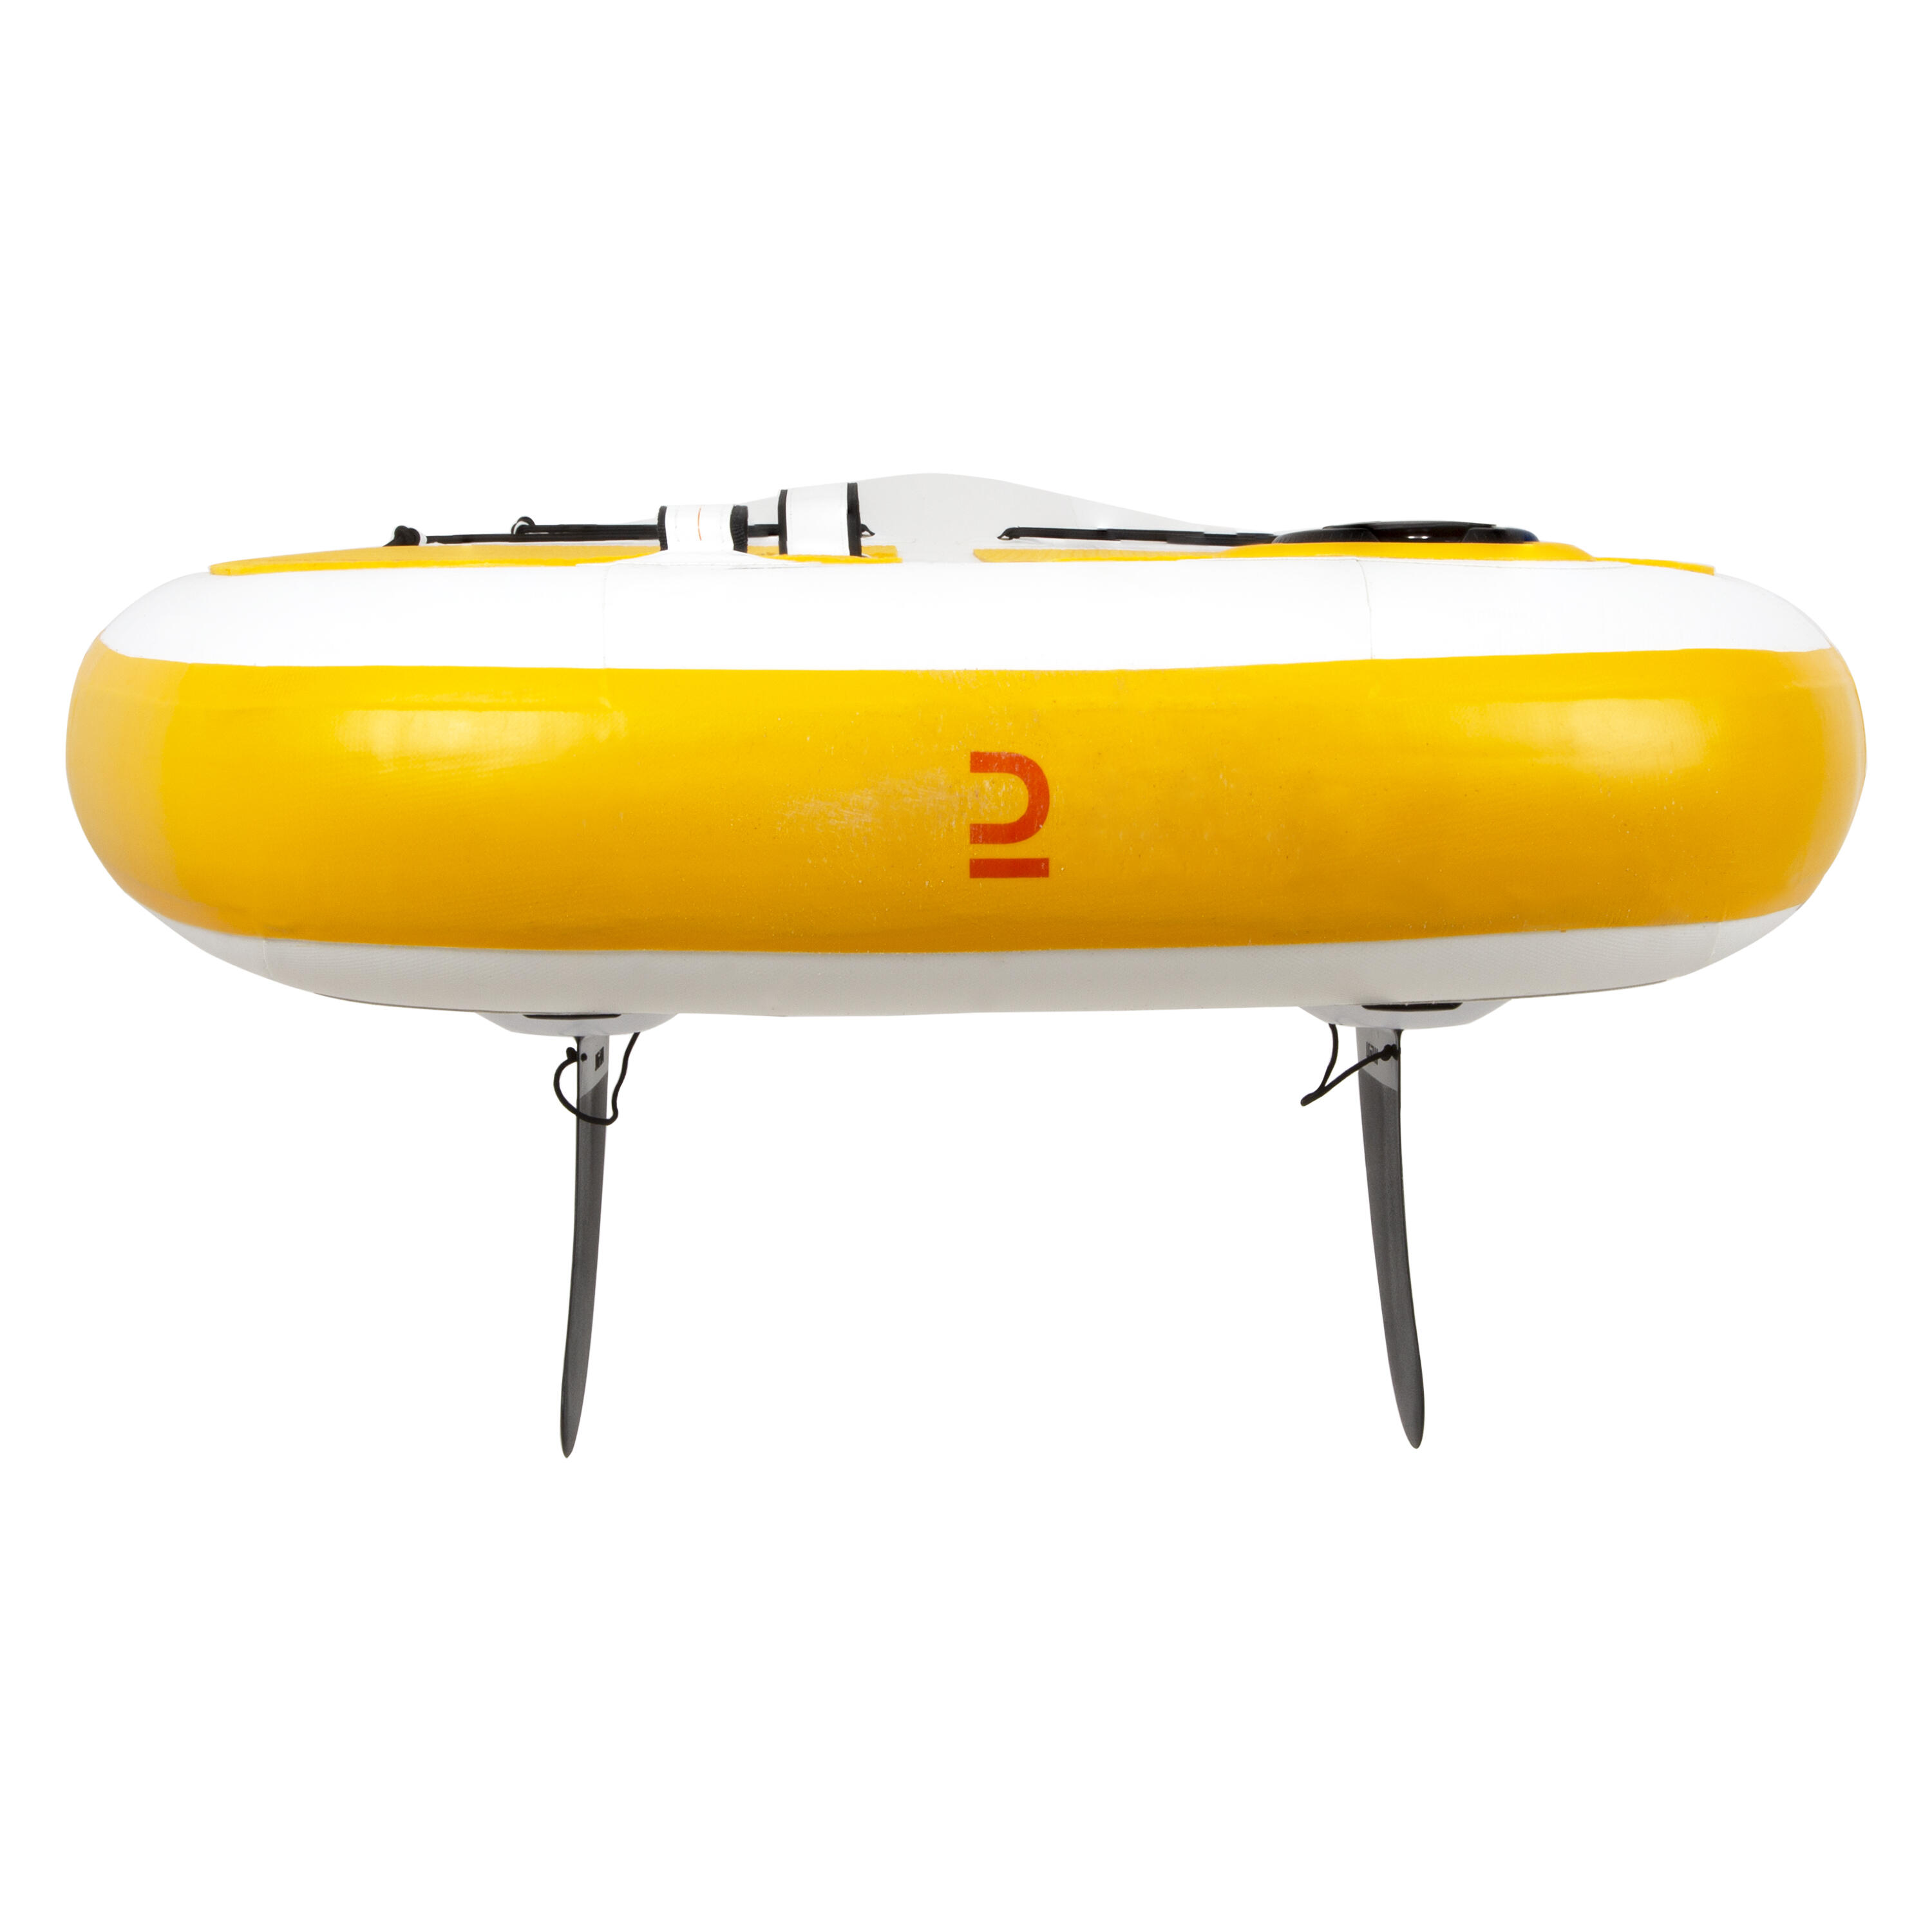 100 COMPACT 8FT (S) INFLATABLE STAND-UP PADDLEBOARD - YELLOW/WHITE (up to 60kg) 10/31